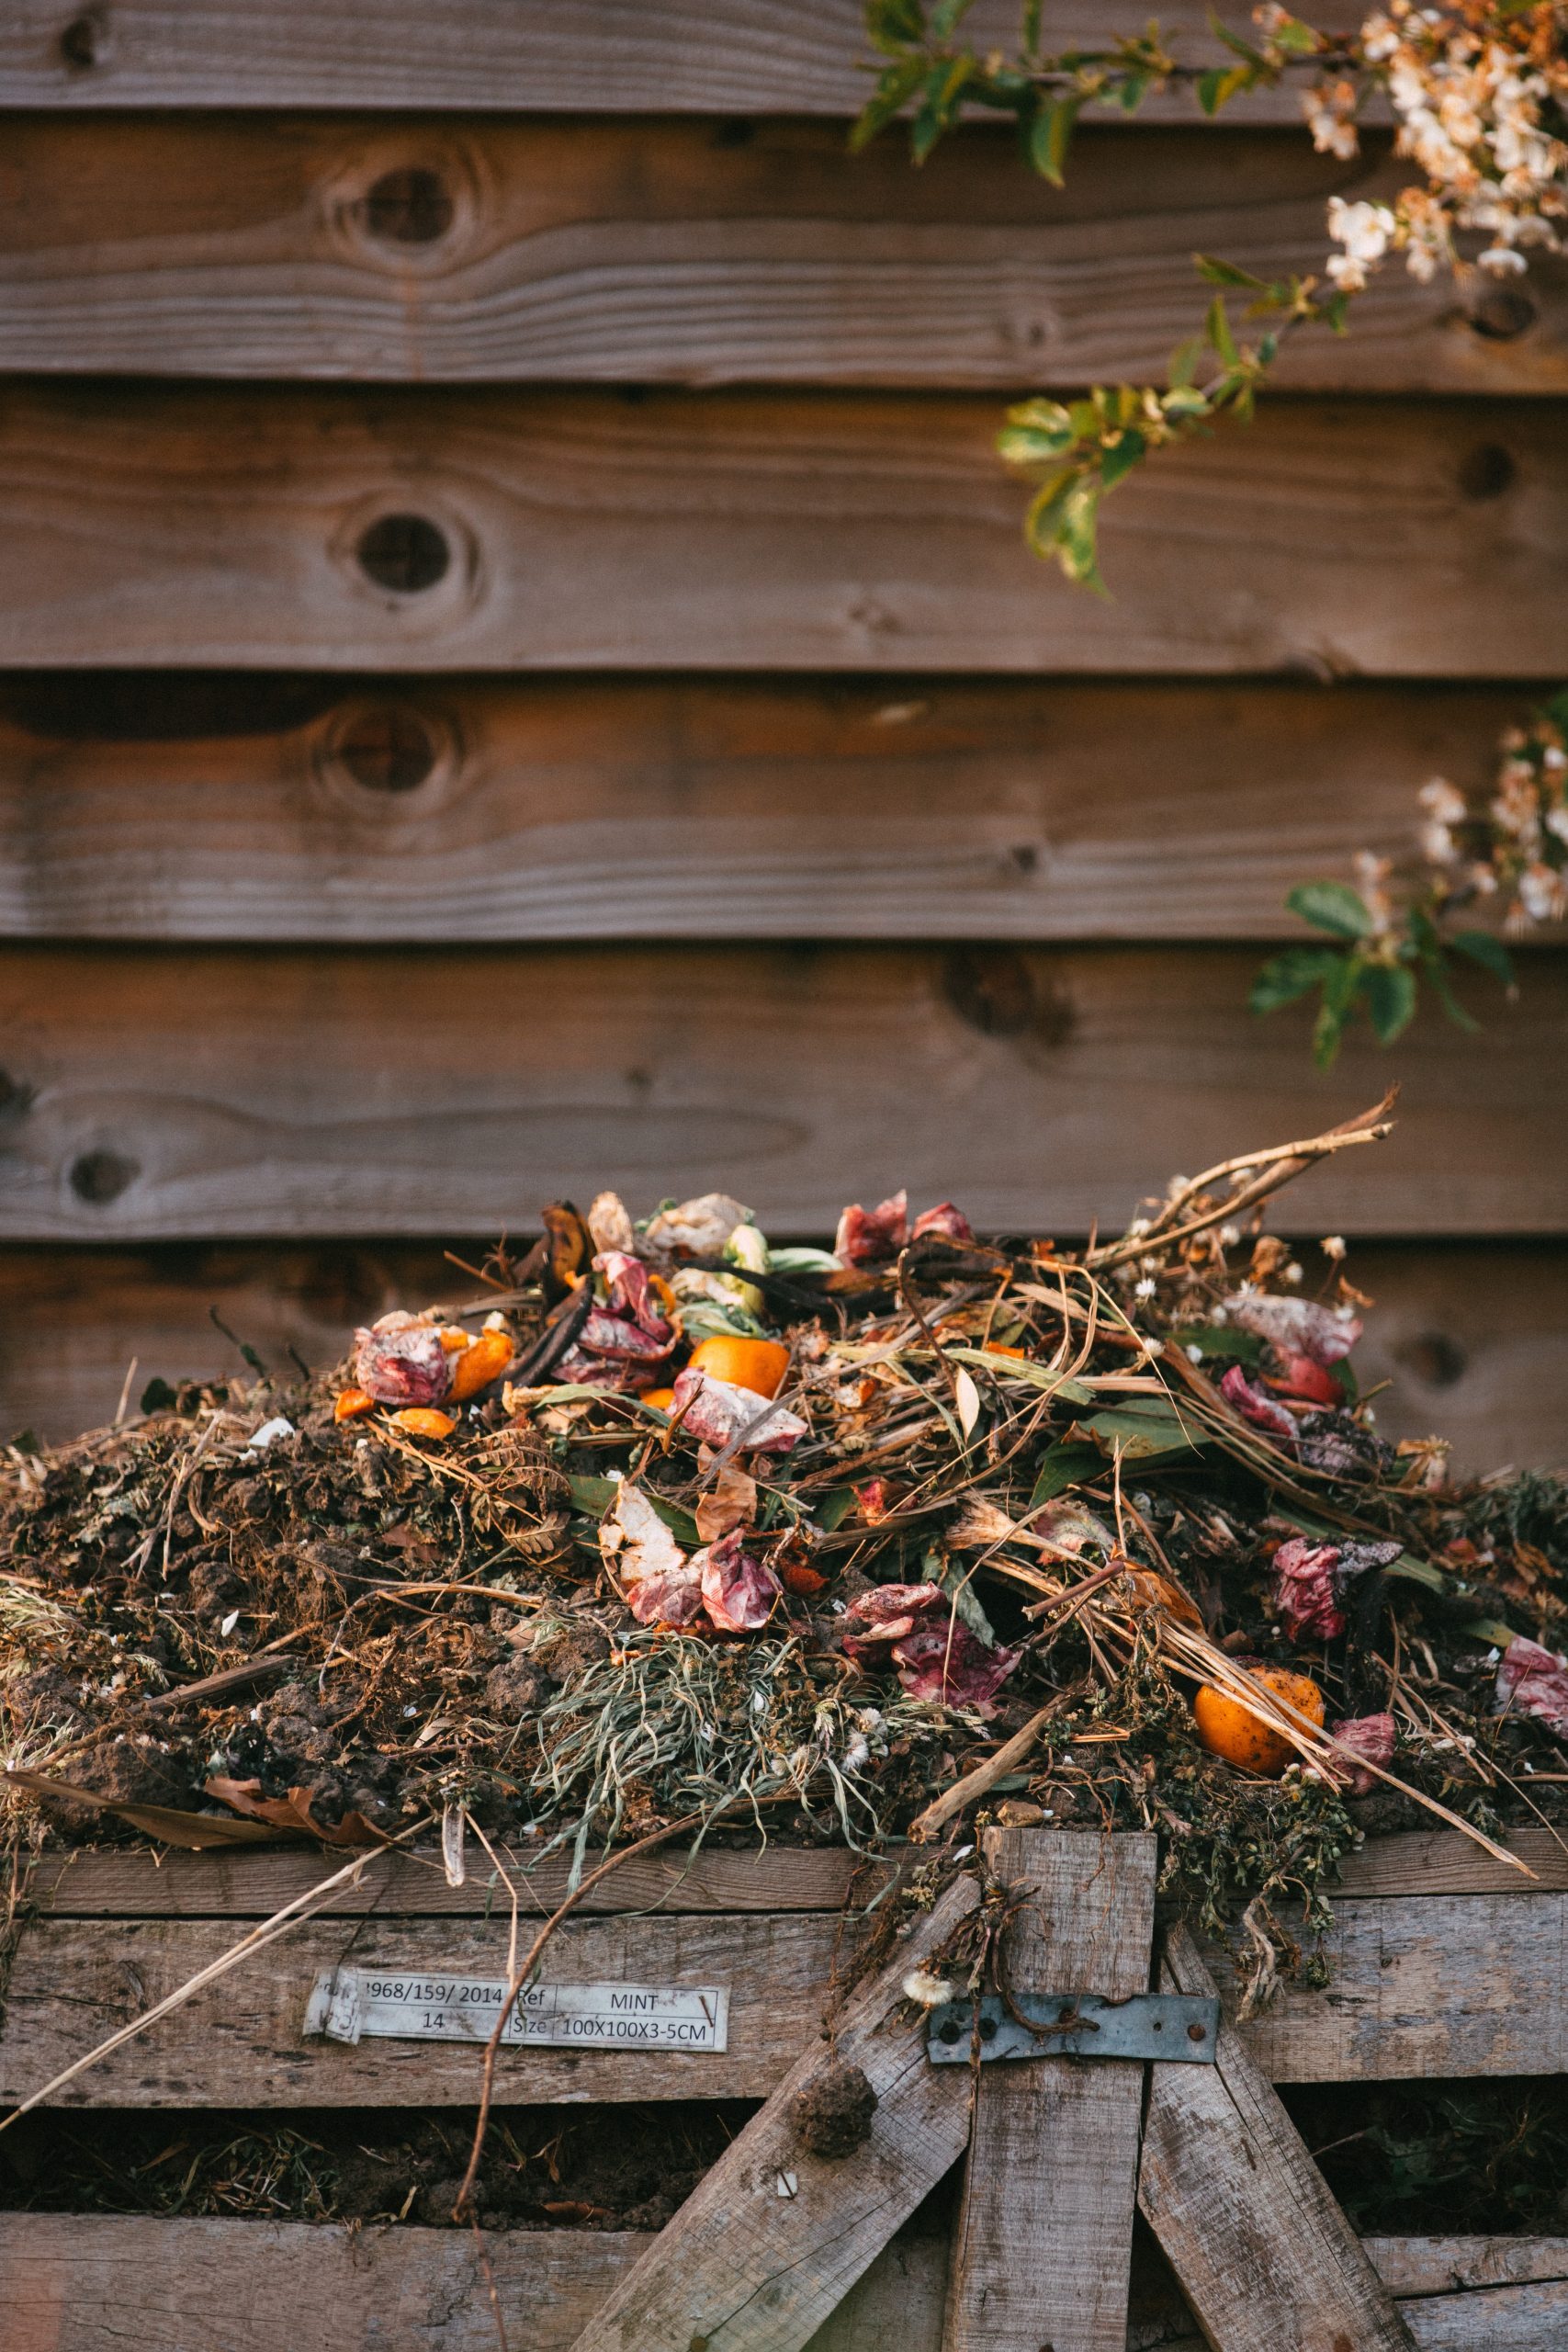 Can You Compost Toxic Plants?